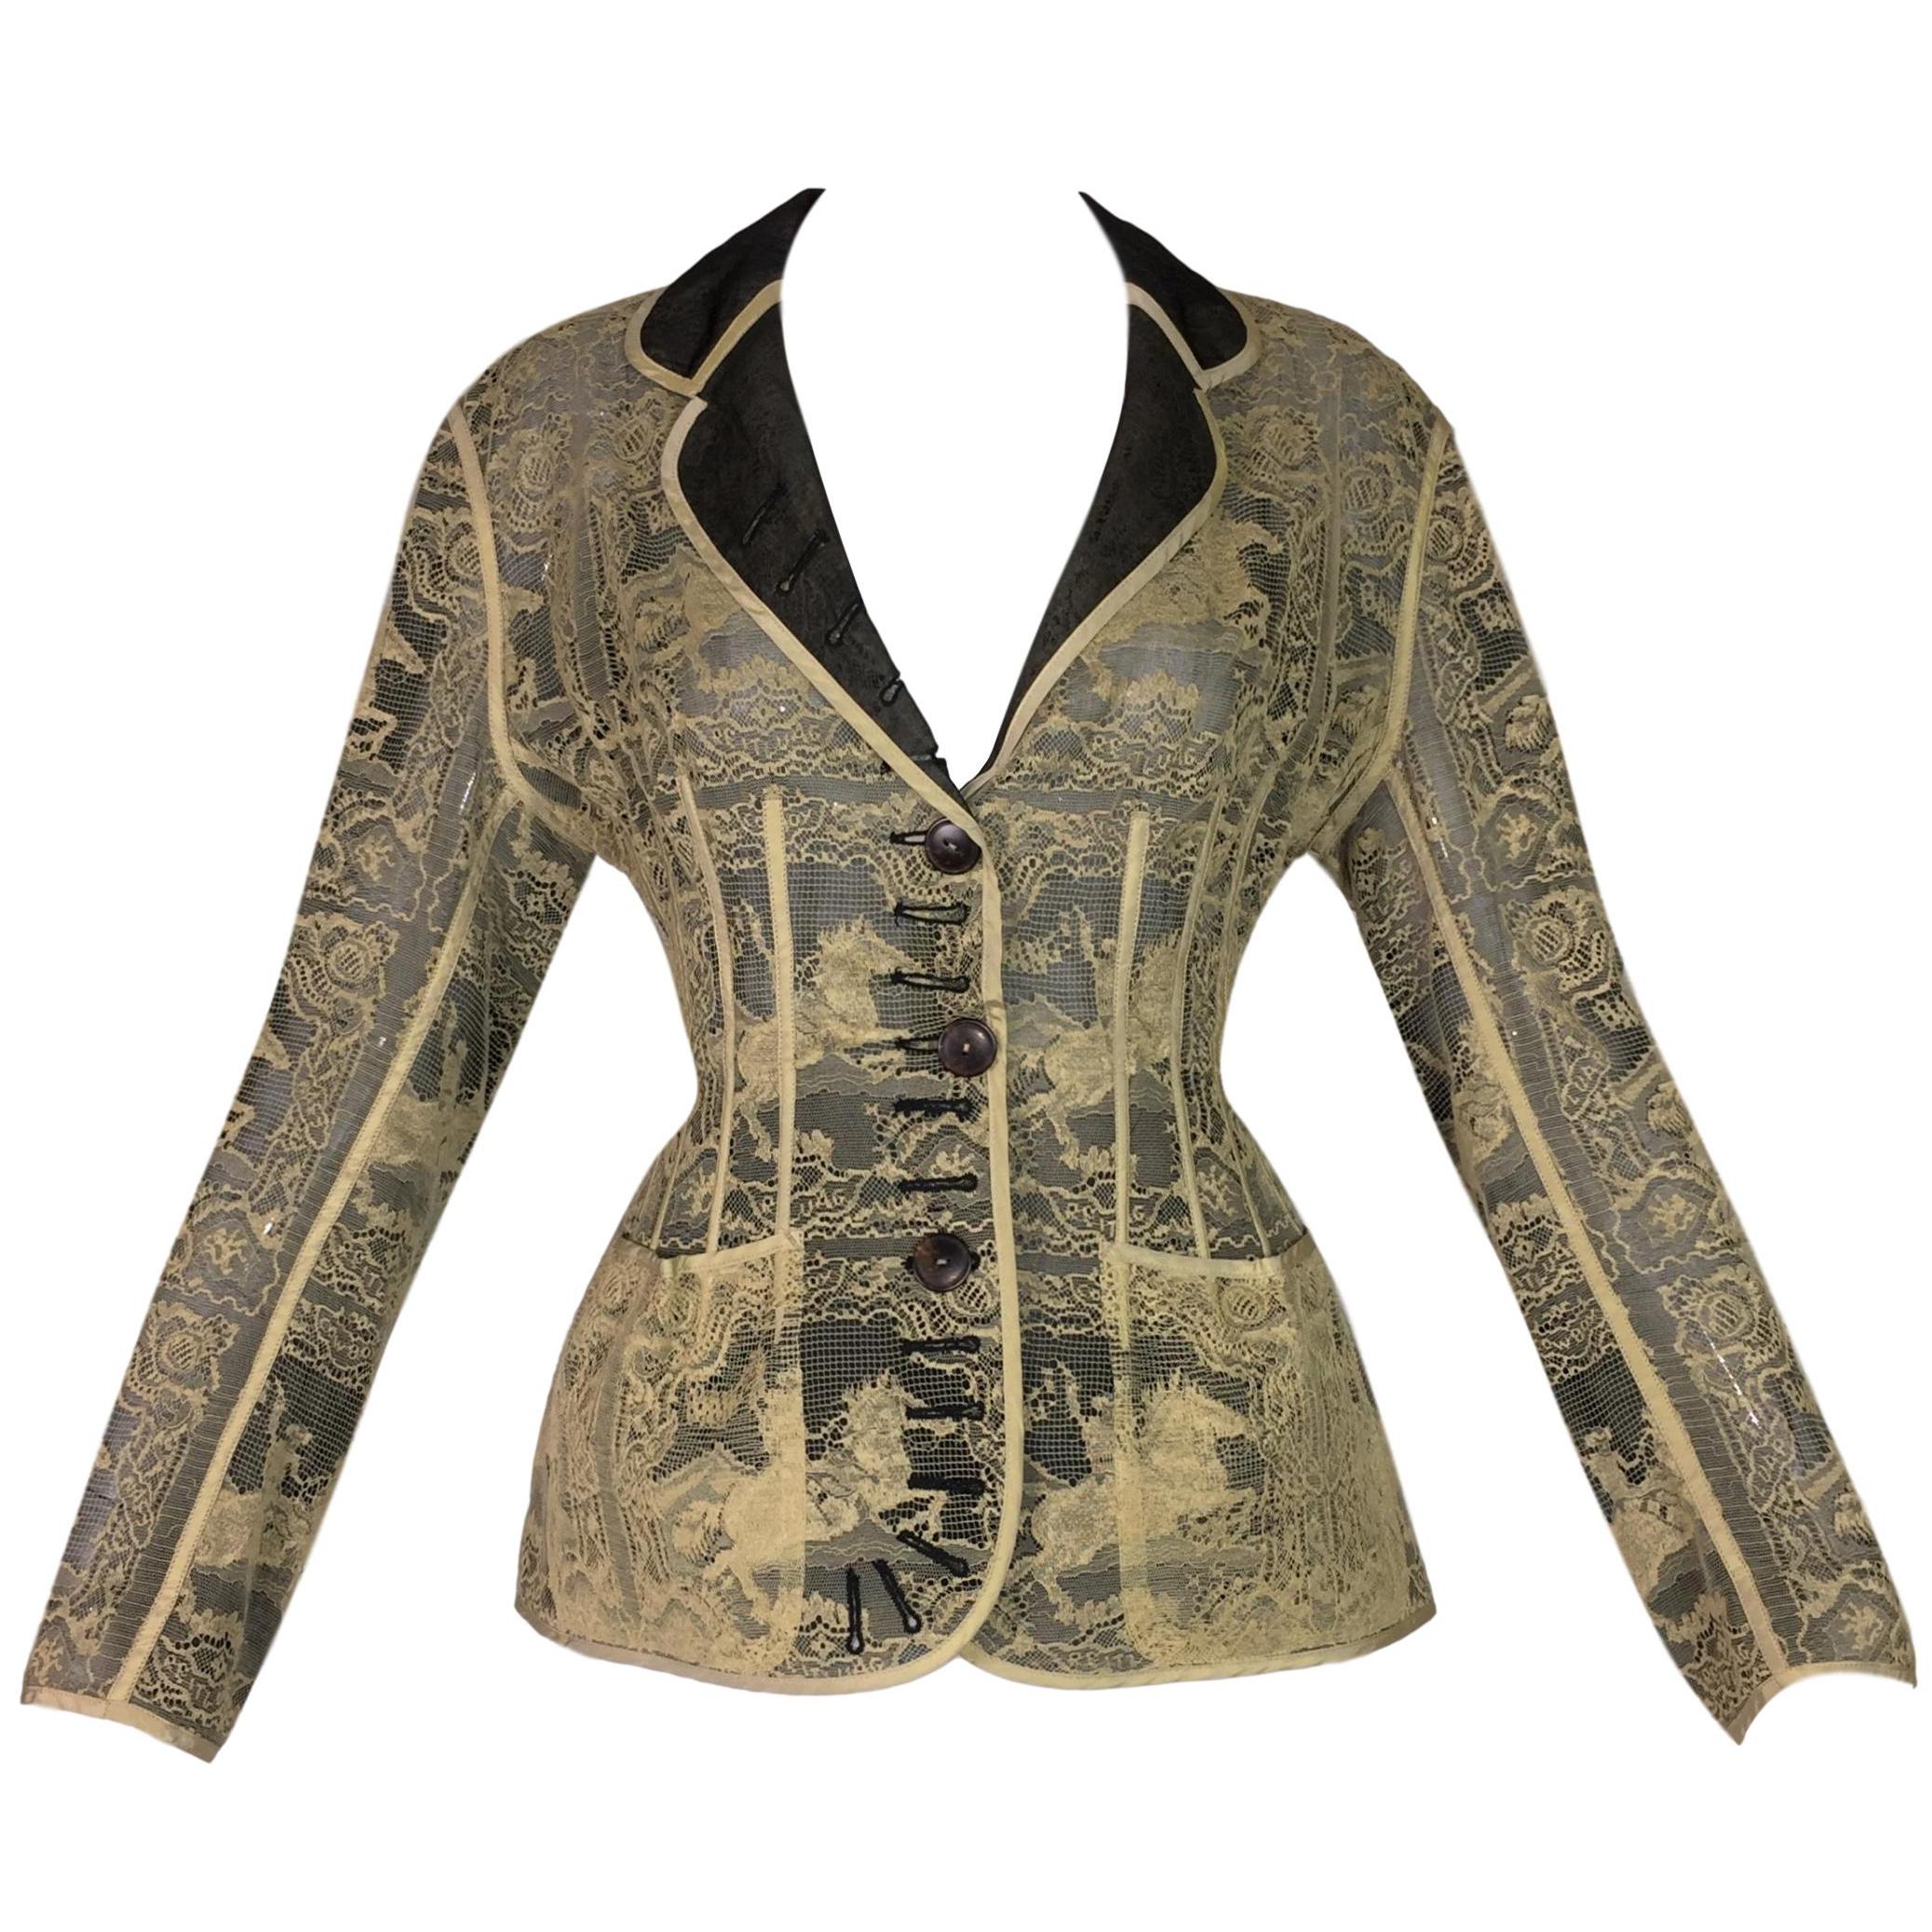 S/S 1988 Jean Paul Gaultier Sheer Chantilly Lace Cowboy Wasp Waist Jacket